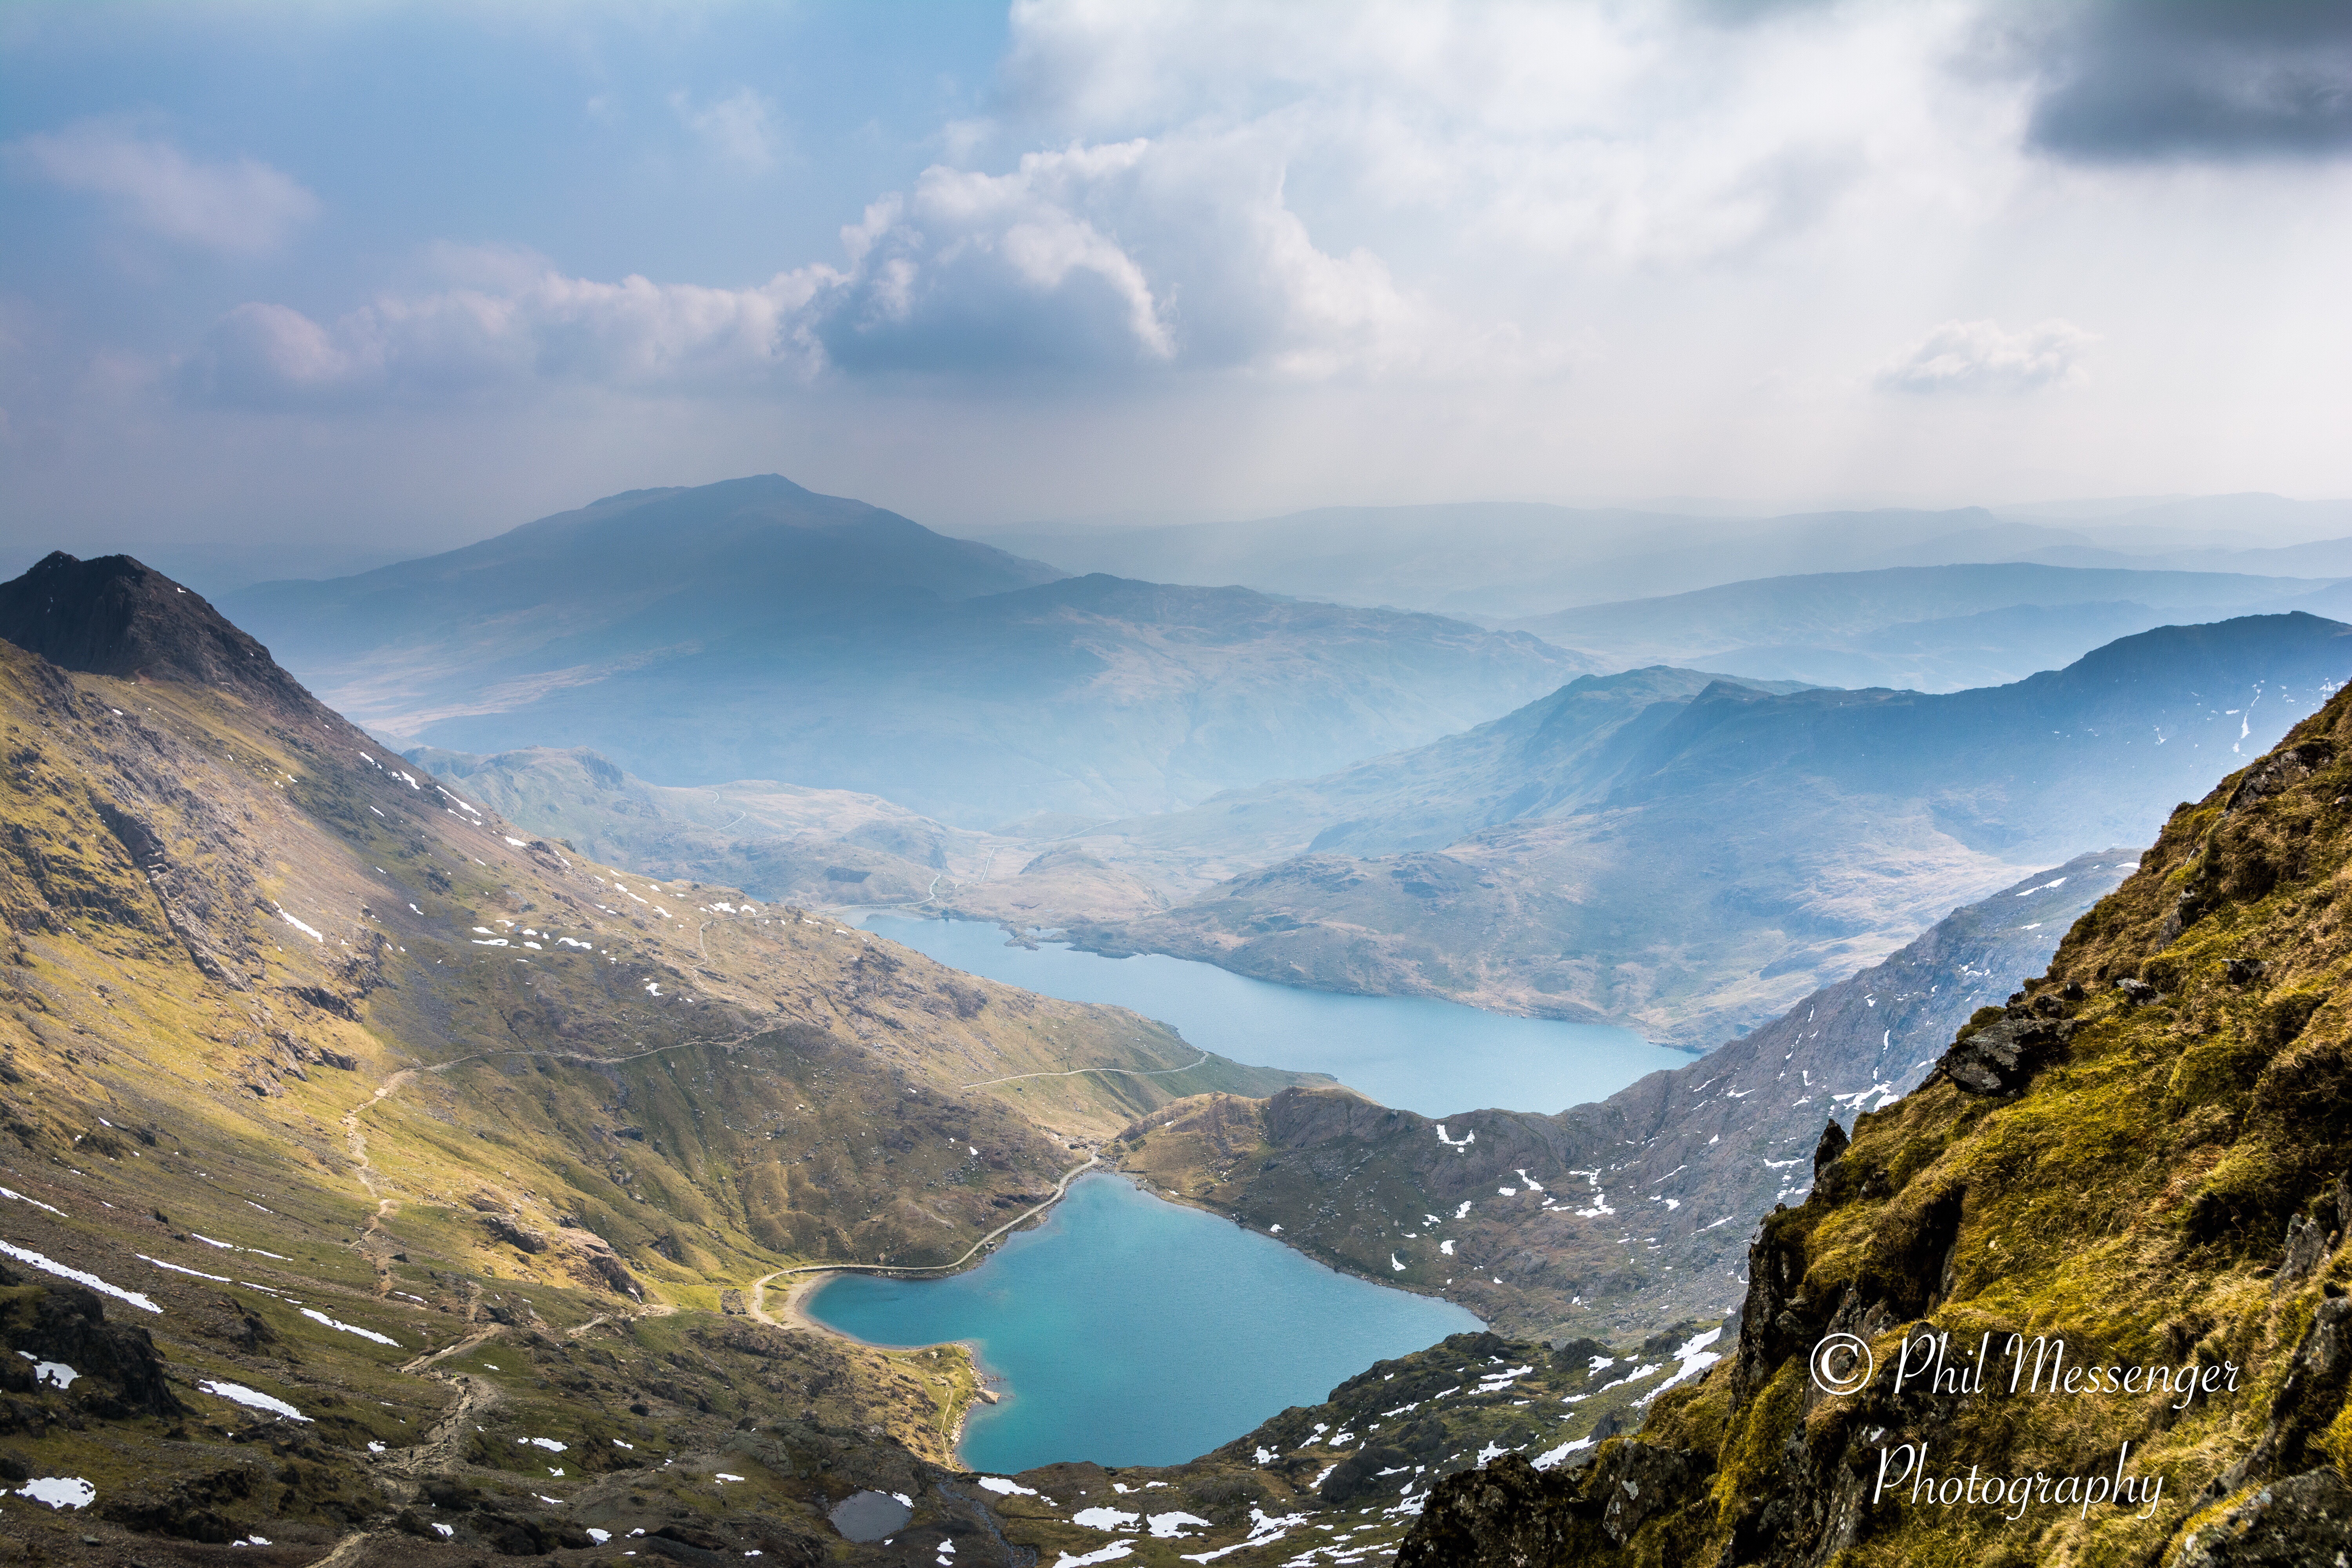 The view from near the summit of Mount Snowdon, Wales, UK.